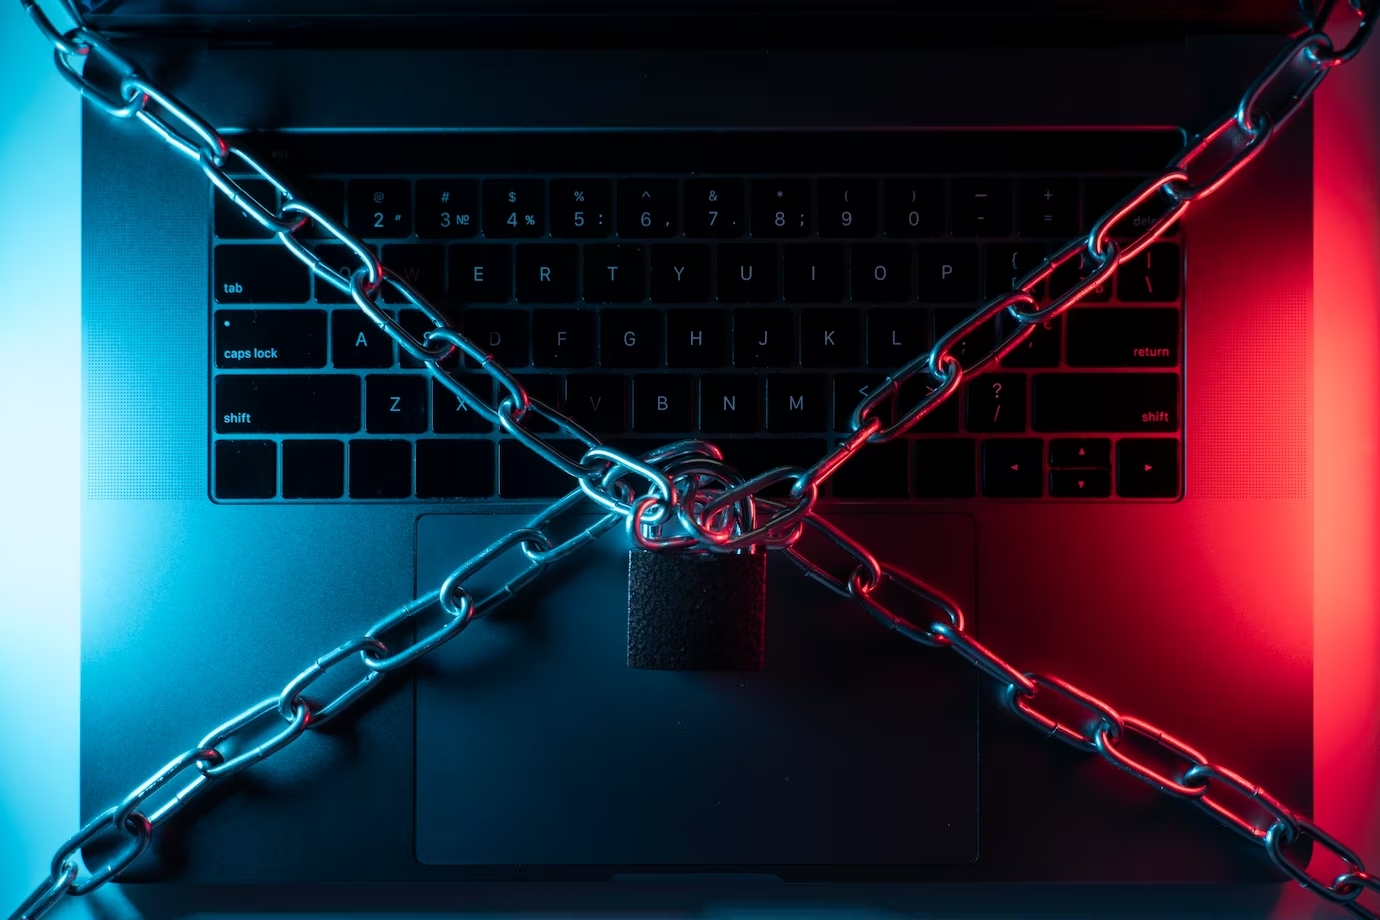 MicroStrategy’s X Account Hacked: $440K in Crypto Stolen Through Phishing Scam